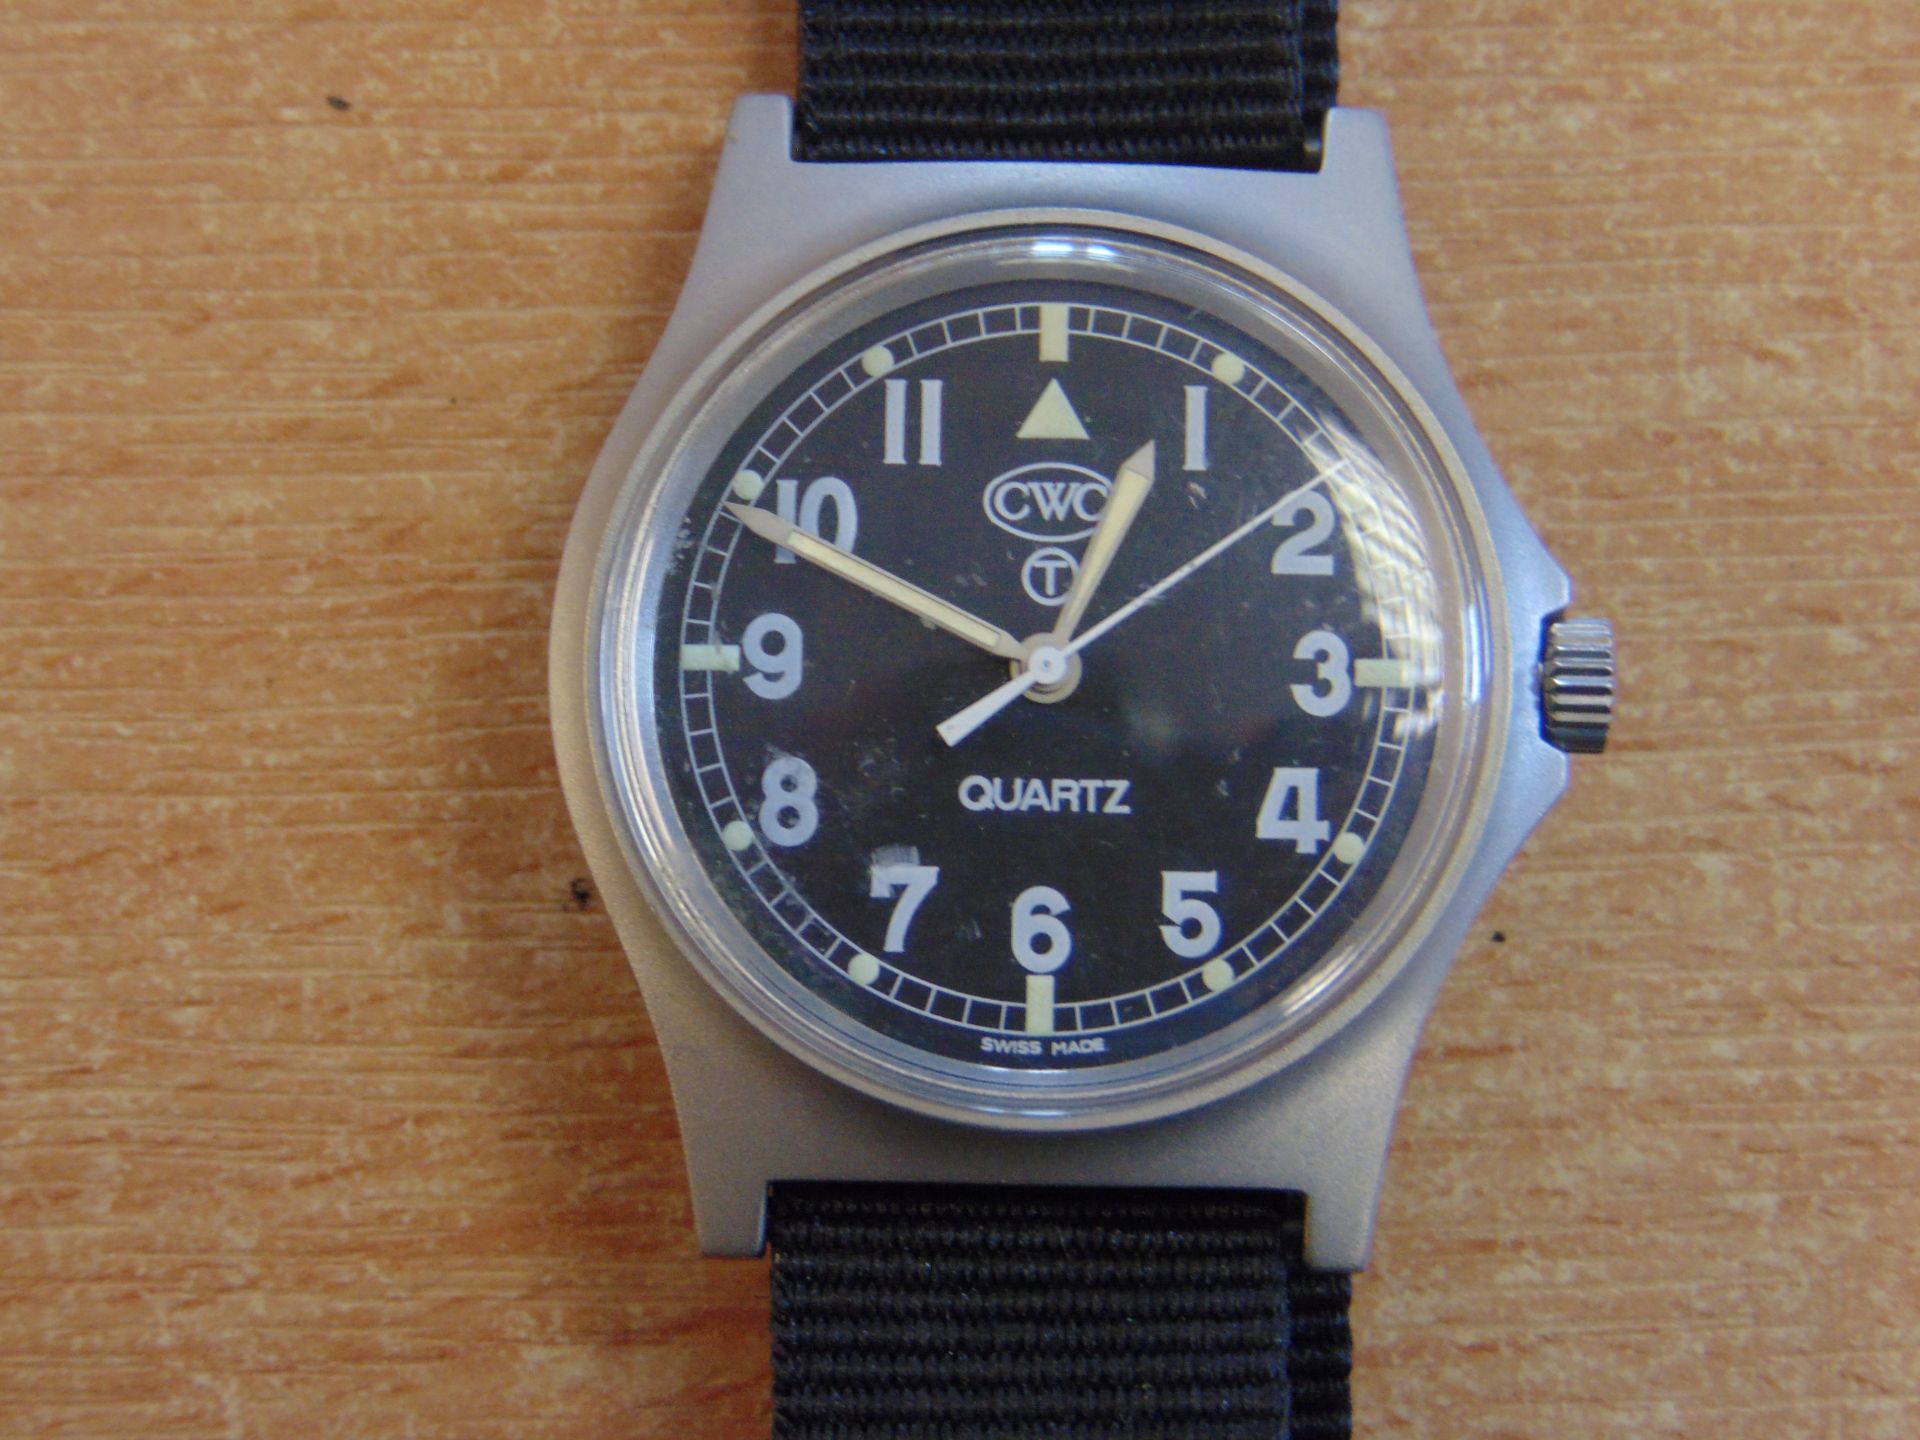 UNIQUE CWC 0552 ROYAL MARINES/ ROYAL NAVY ISSUE SERVICE WATCH DATED 1990 ** GULF WAR** SN.66054 - Image 2 of 9